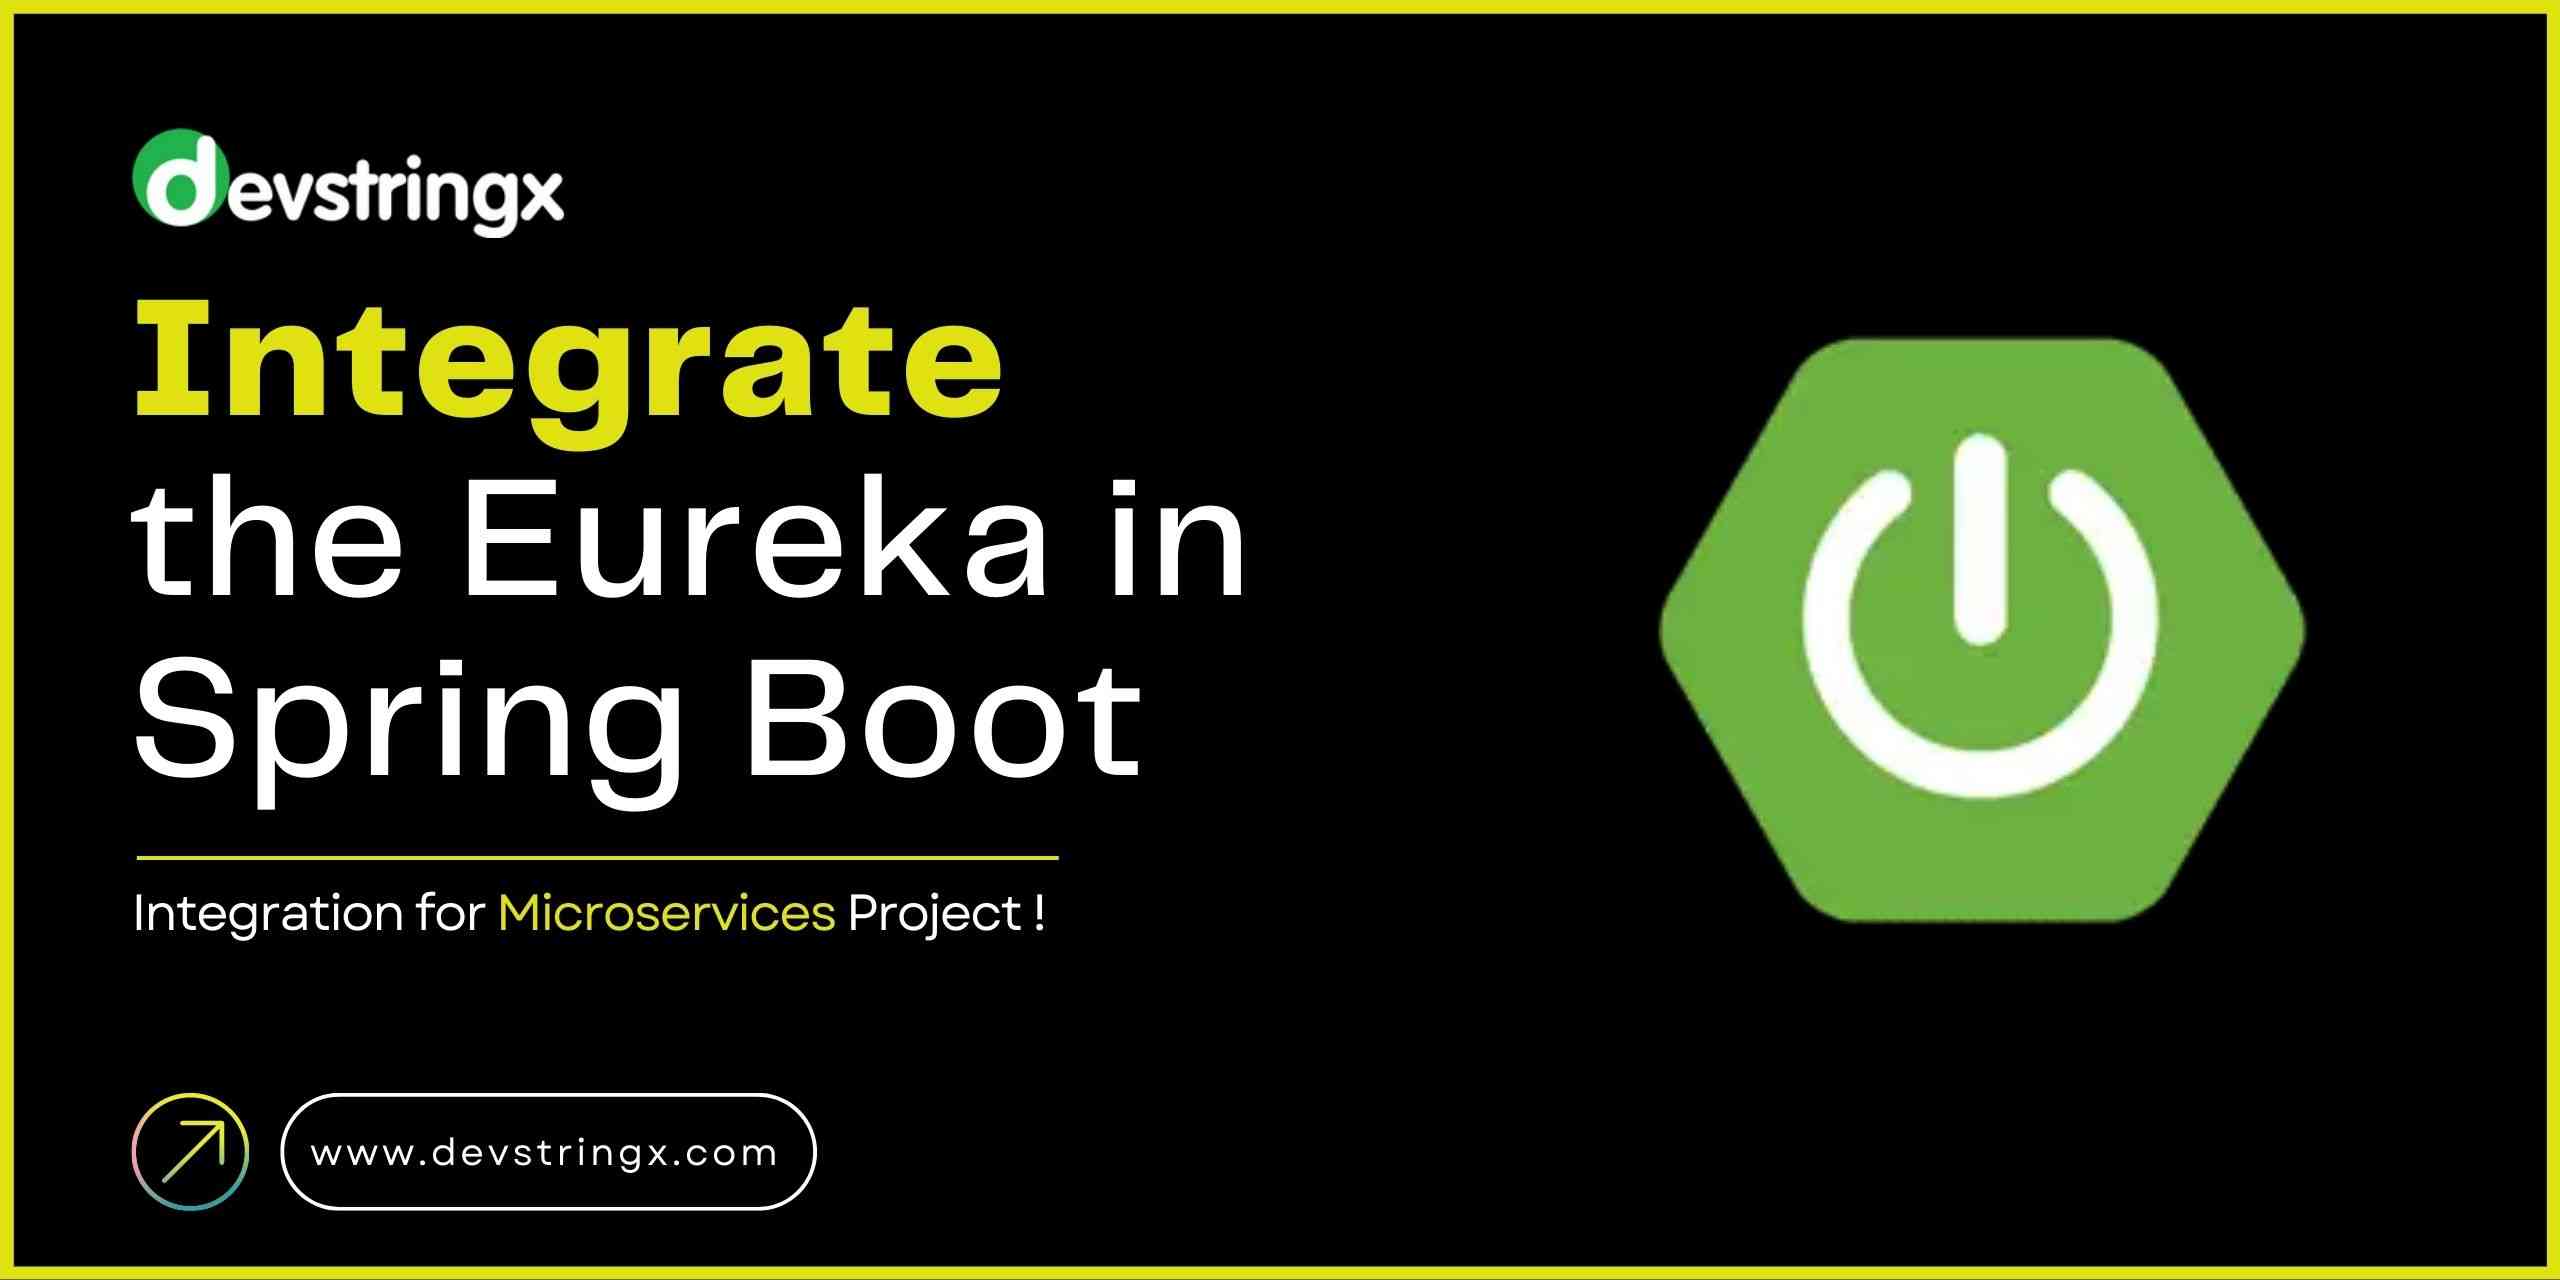 Feature image for eureka integration in spring boot blog